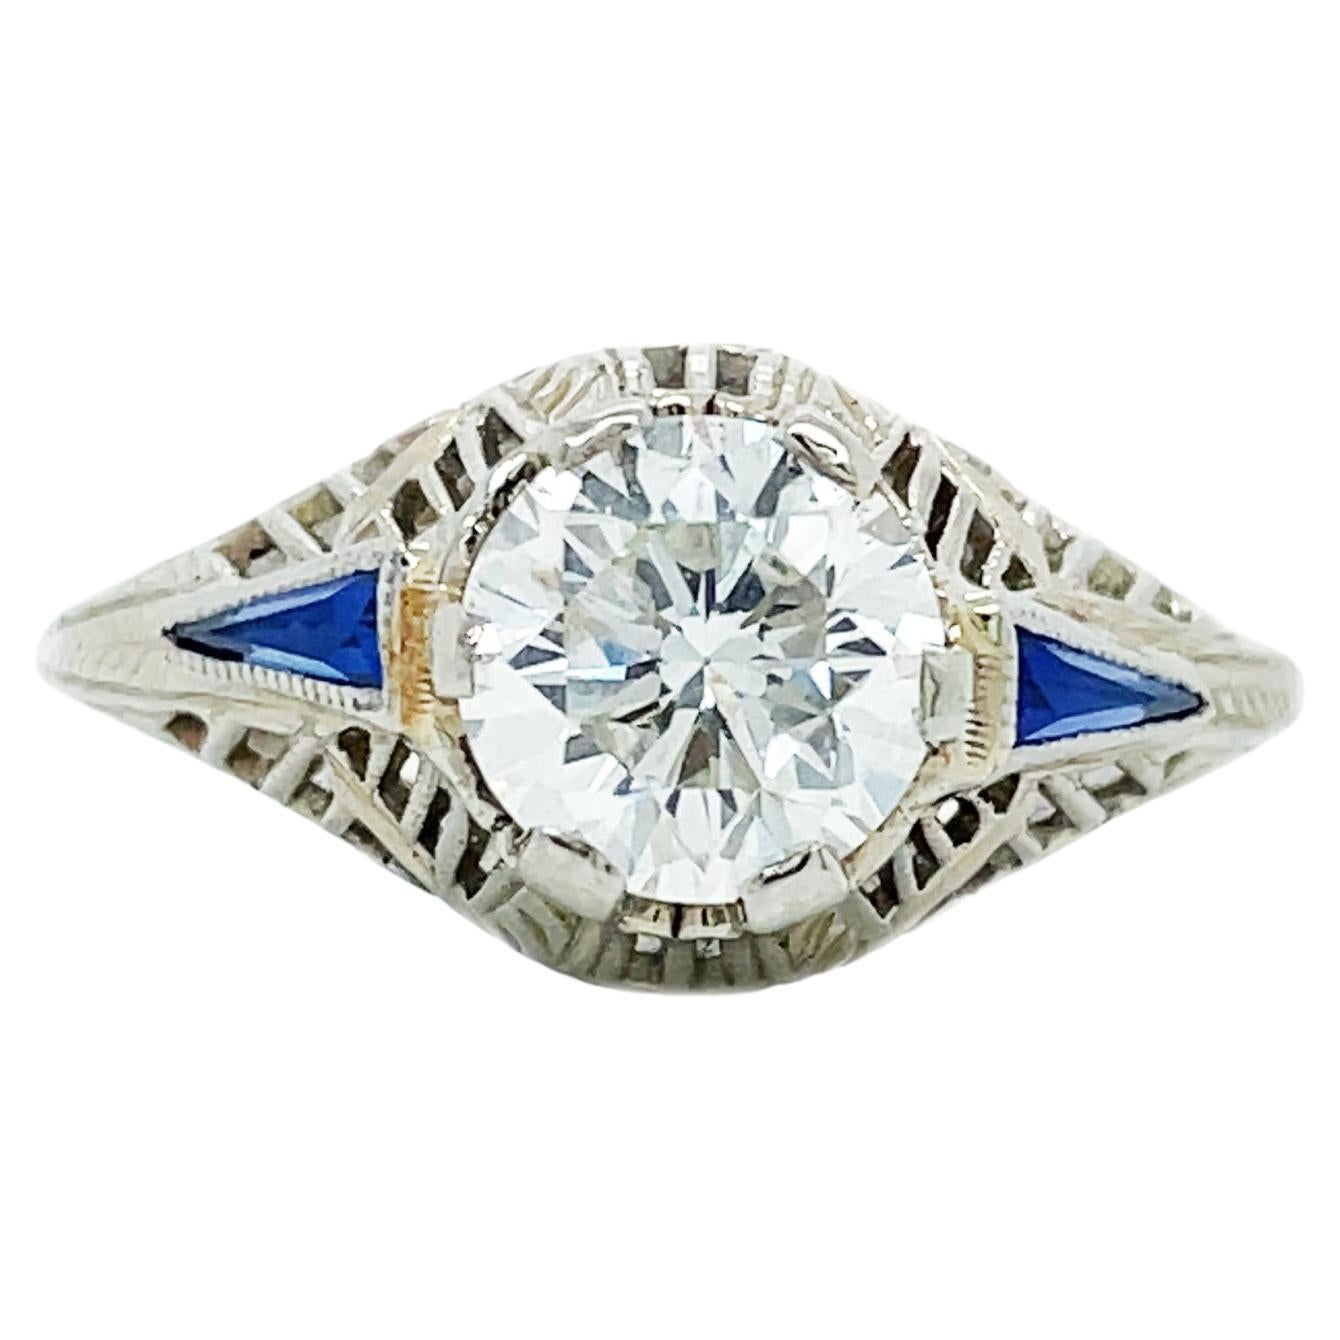 1925 Art Deco Diamond and Sapphire White Gold Ring with AGS Report